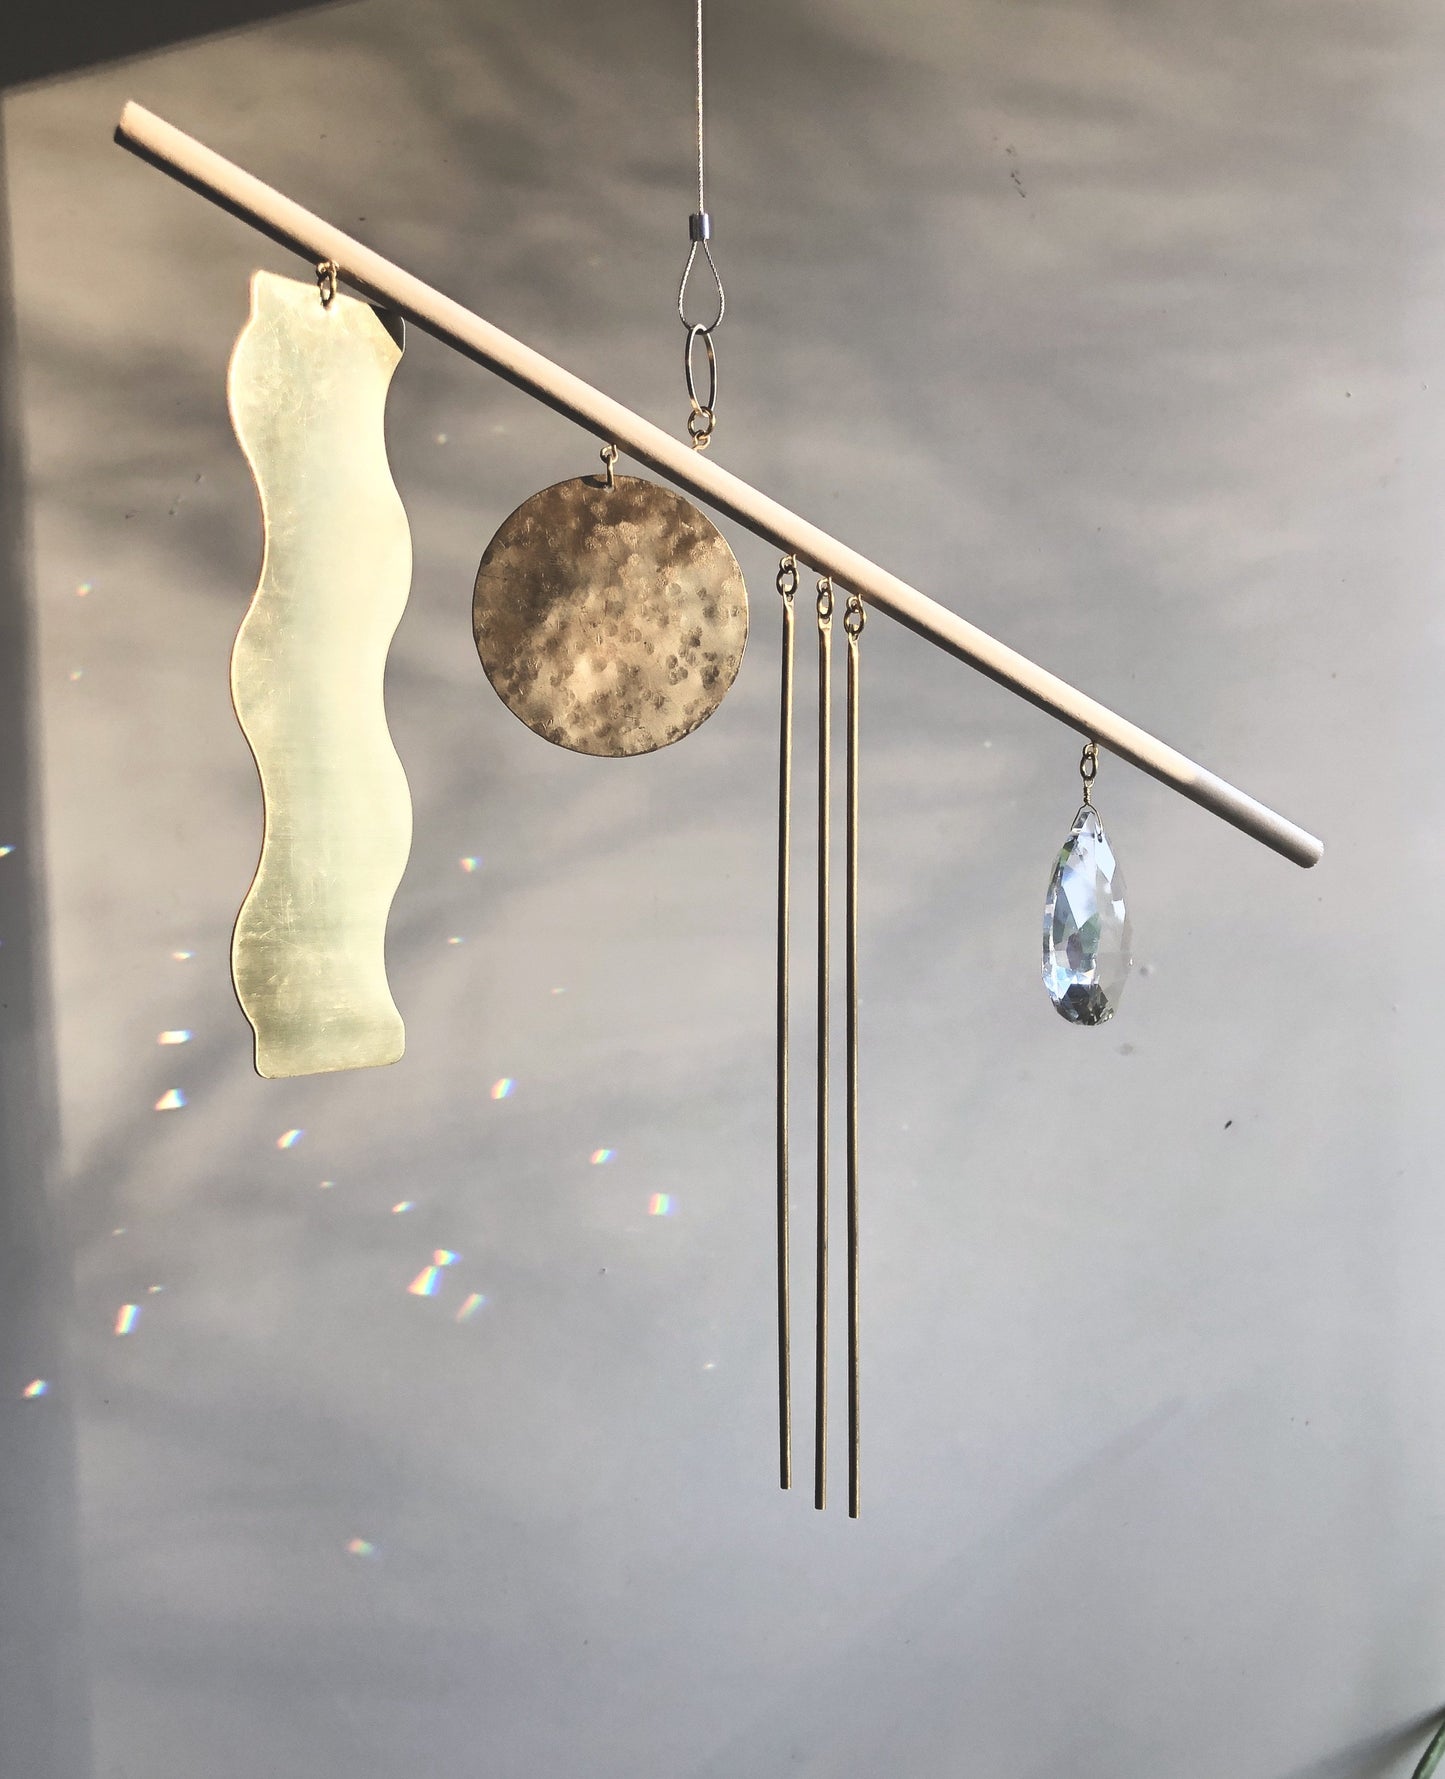 Goldy Sun Catcher - Artisan-crafted sun catcher made from raw wood, hand-cut, brushed/hammered brass sheet and vintage faceted crystal. Ready to hang in any space in your home - on a wall to brighten or in a window to catch the light.